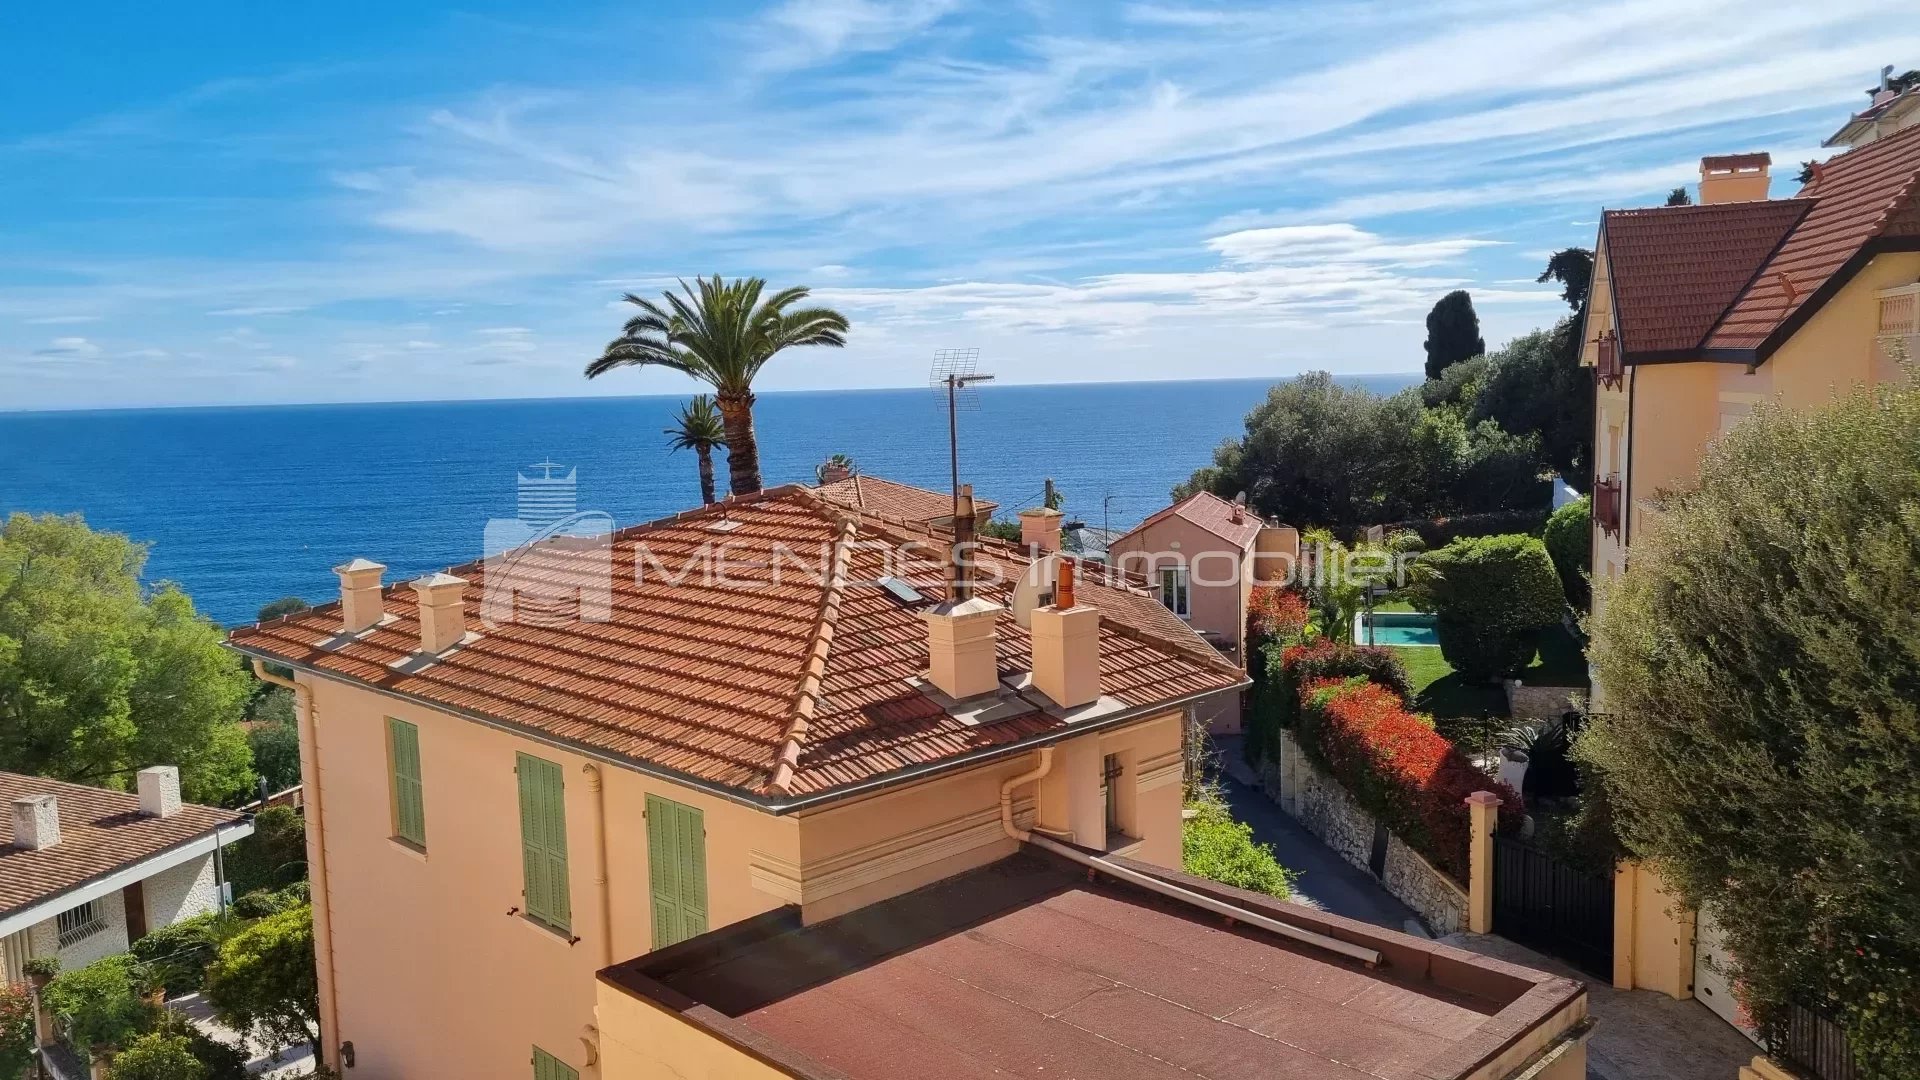 3BR WITH SEA VIEW IN CAP D'AIL